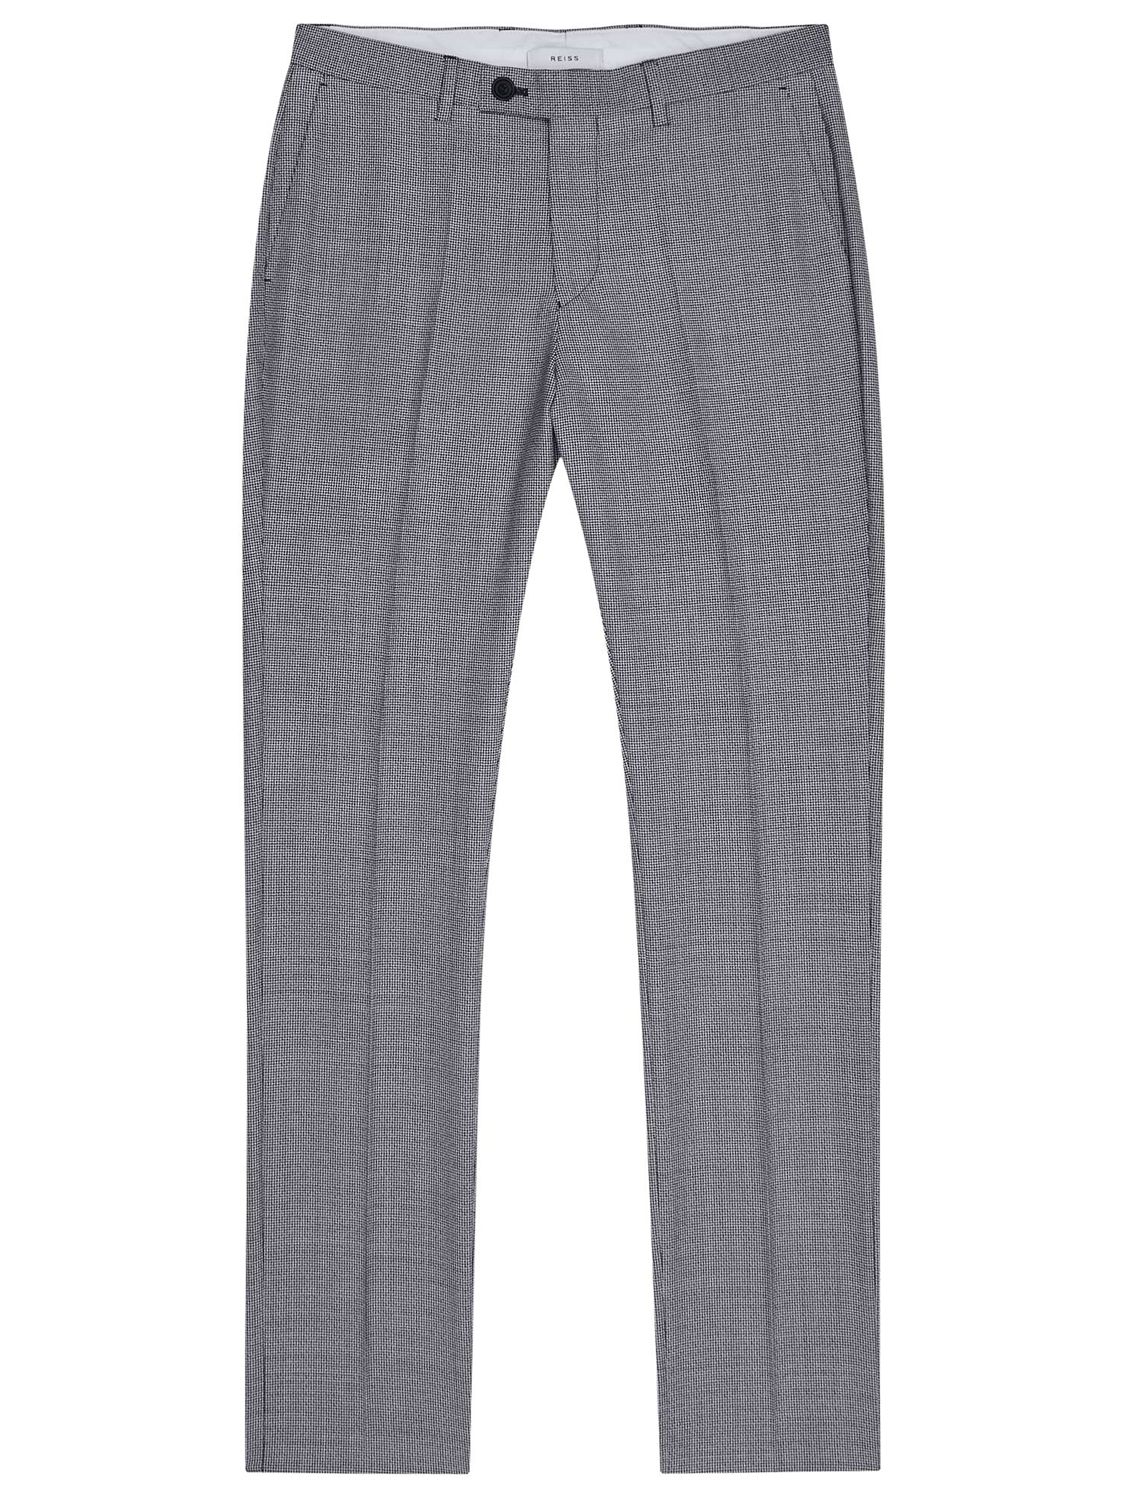 Reiss Wangle Slim Fit Puppytooth Suit Trousers, Soft Blue